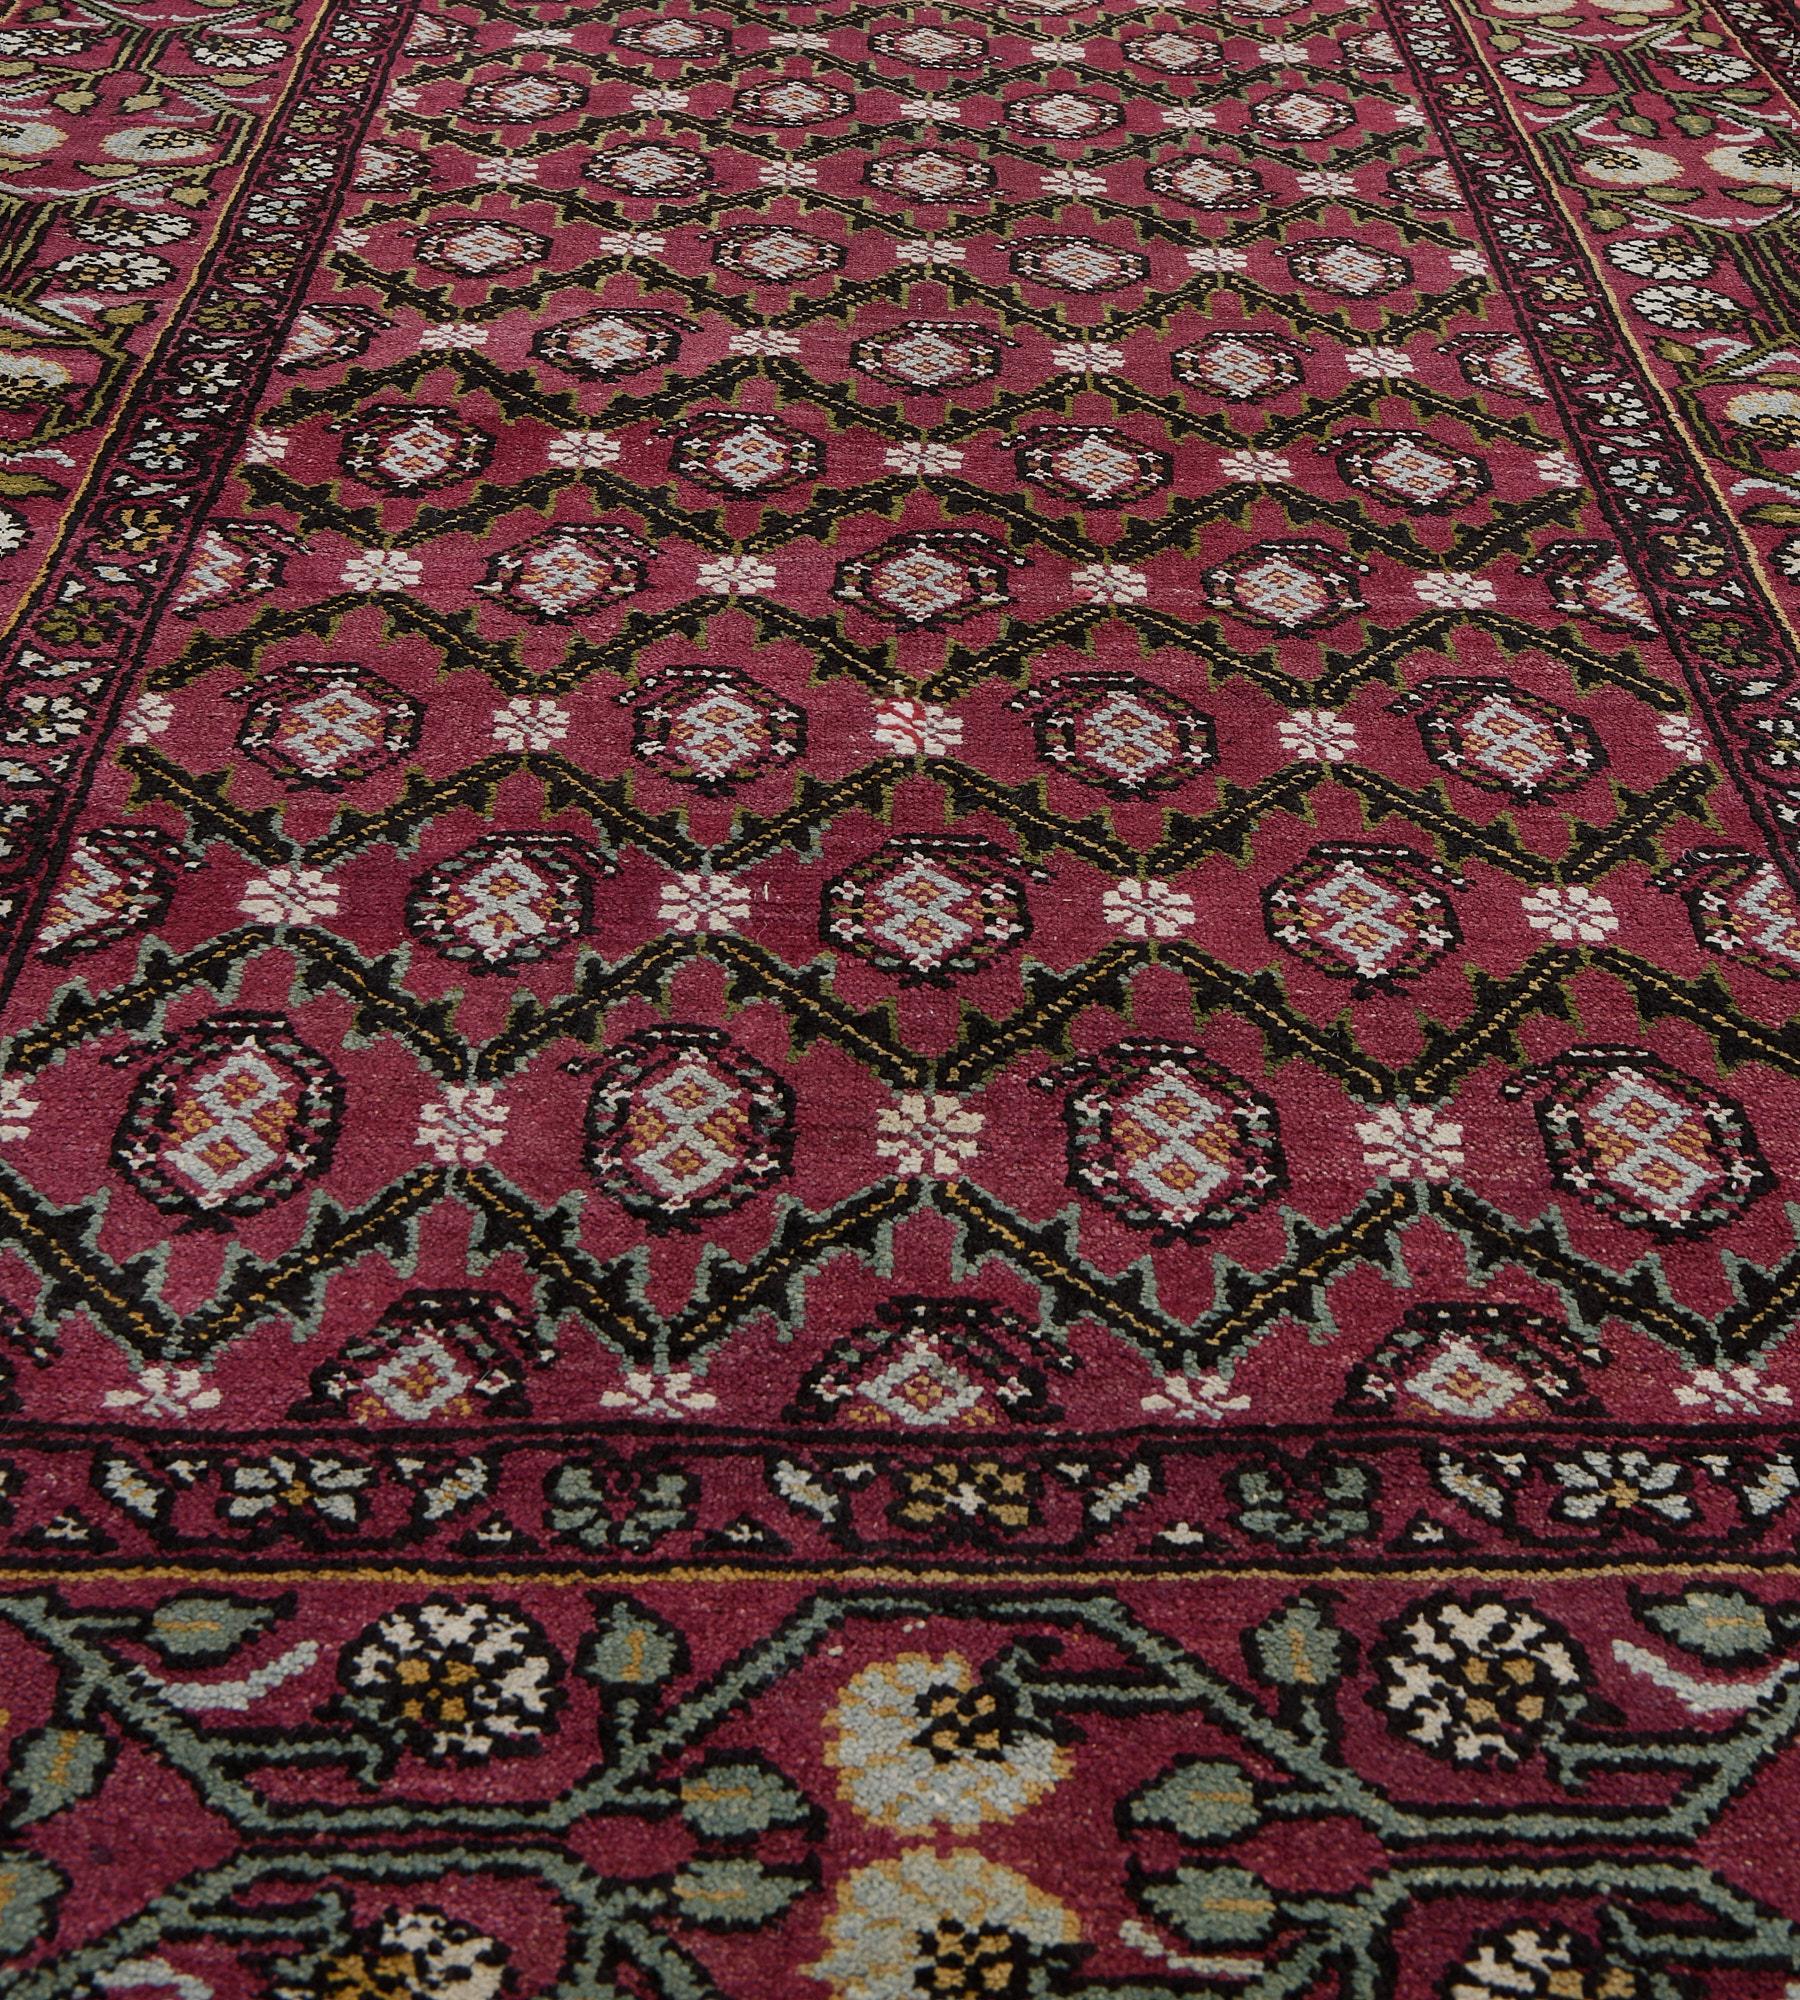 This antique, circa 1900, Agra rug has a burgundy-red field with an overall design of diagonal rows of charcoal-black serrated lozenge vine each lozenge containing a central boteh containing a pair of ice-blue linked lozenges, in a burgundy-red